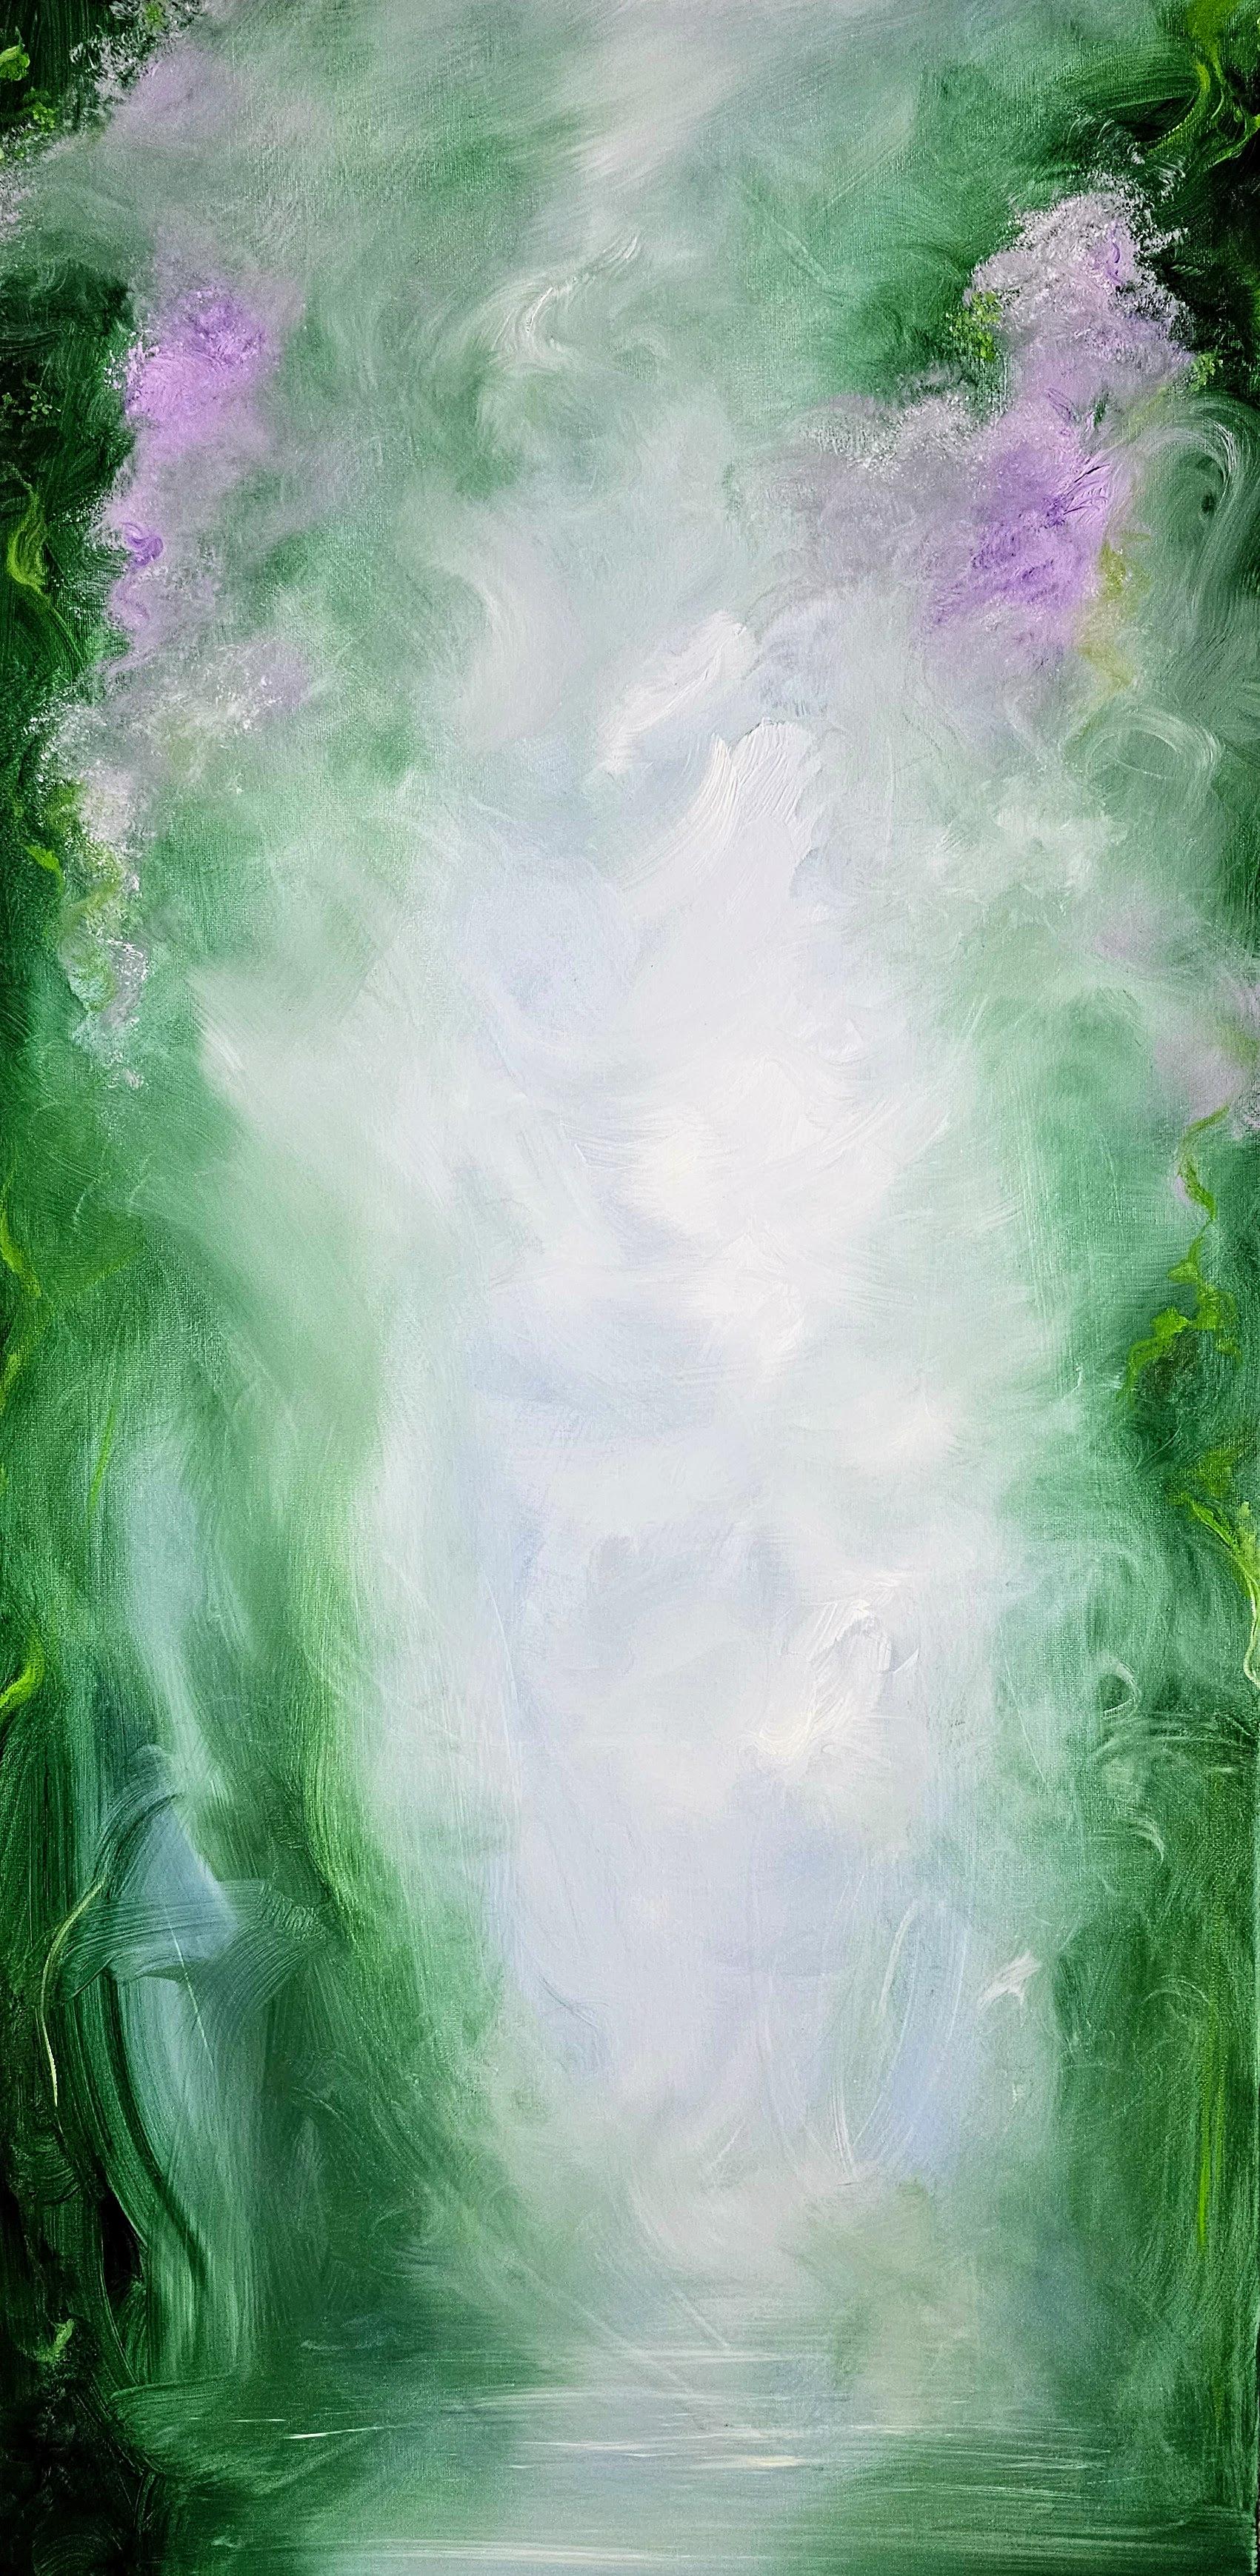 Jennifer L. Baker Abstract Painting - Summer solstice - Vibrant green abstract nature painting